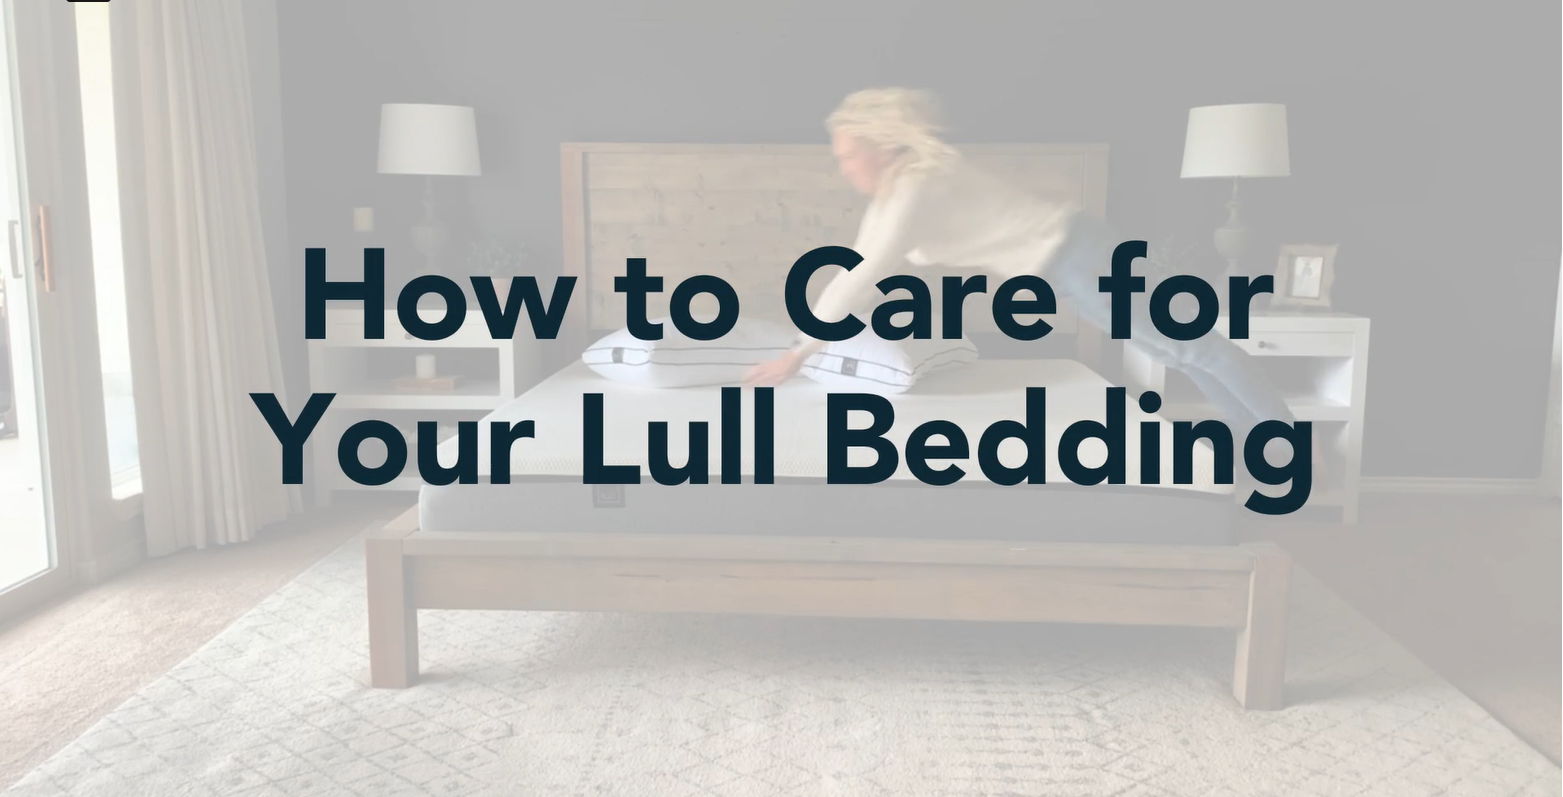 How to care for your lull bedding.